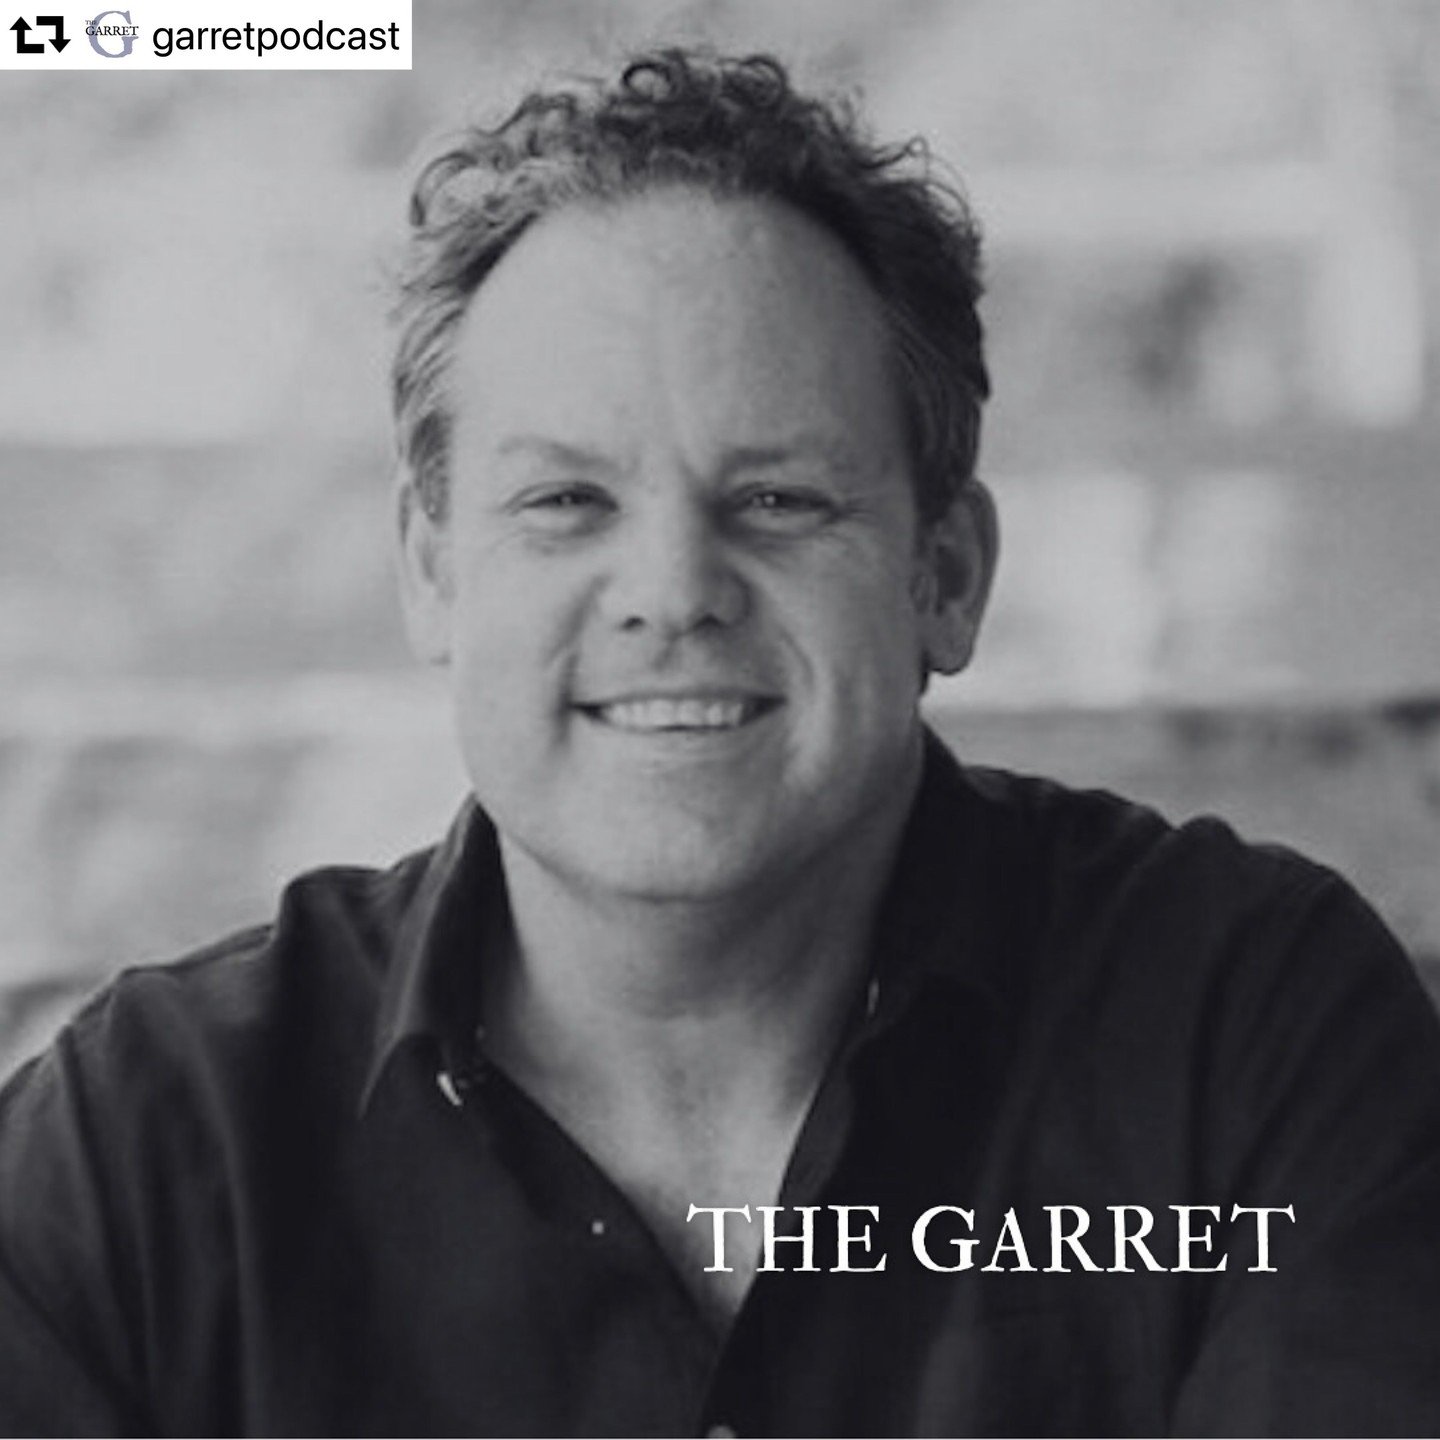 I greatly enjoyed talking all things short fiction recently with the wonderful Astrid Edwards on The Garret podcast! For those not yet in the know, The Garret is a podcast for lovers of books and storytelling. It's unparalleled in Australia in terms 